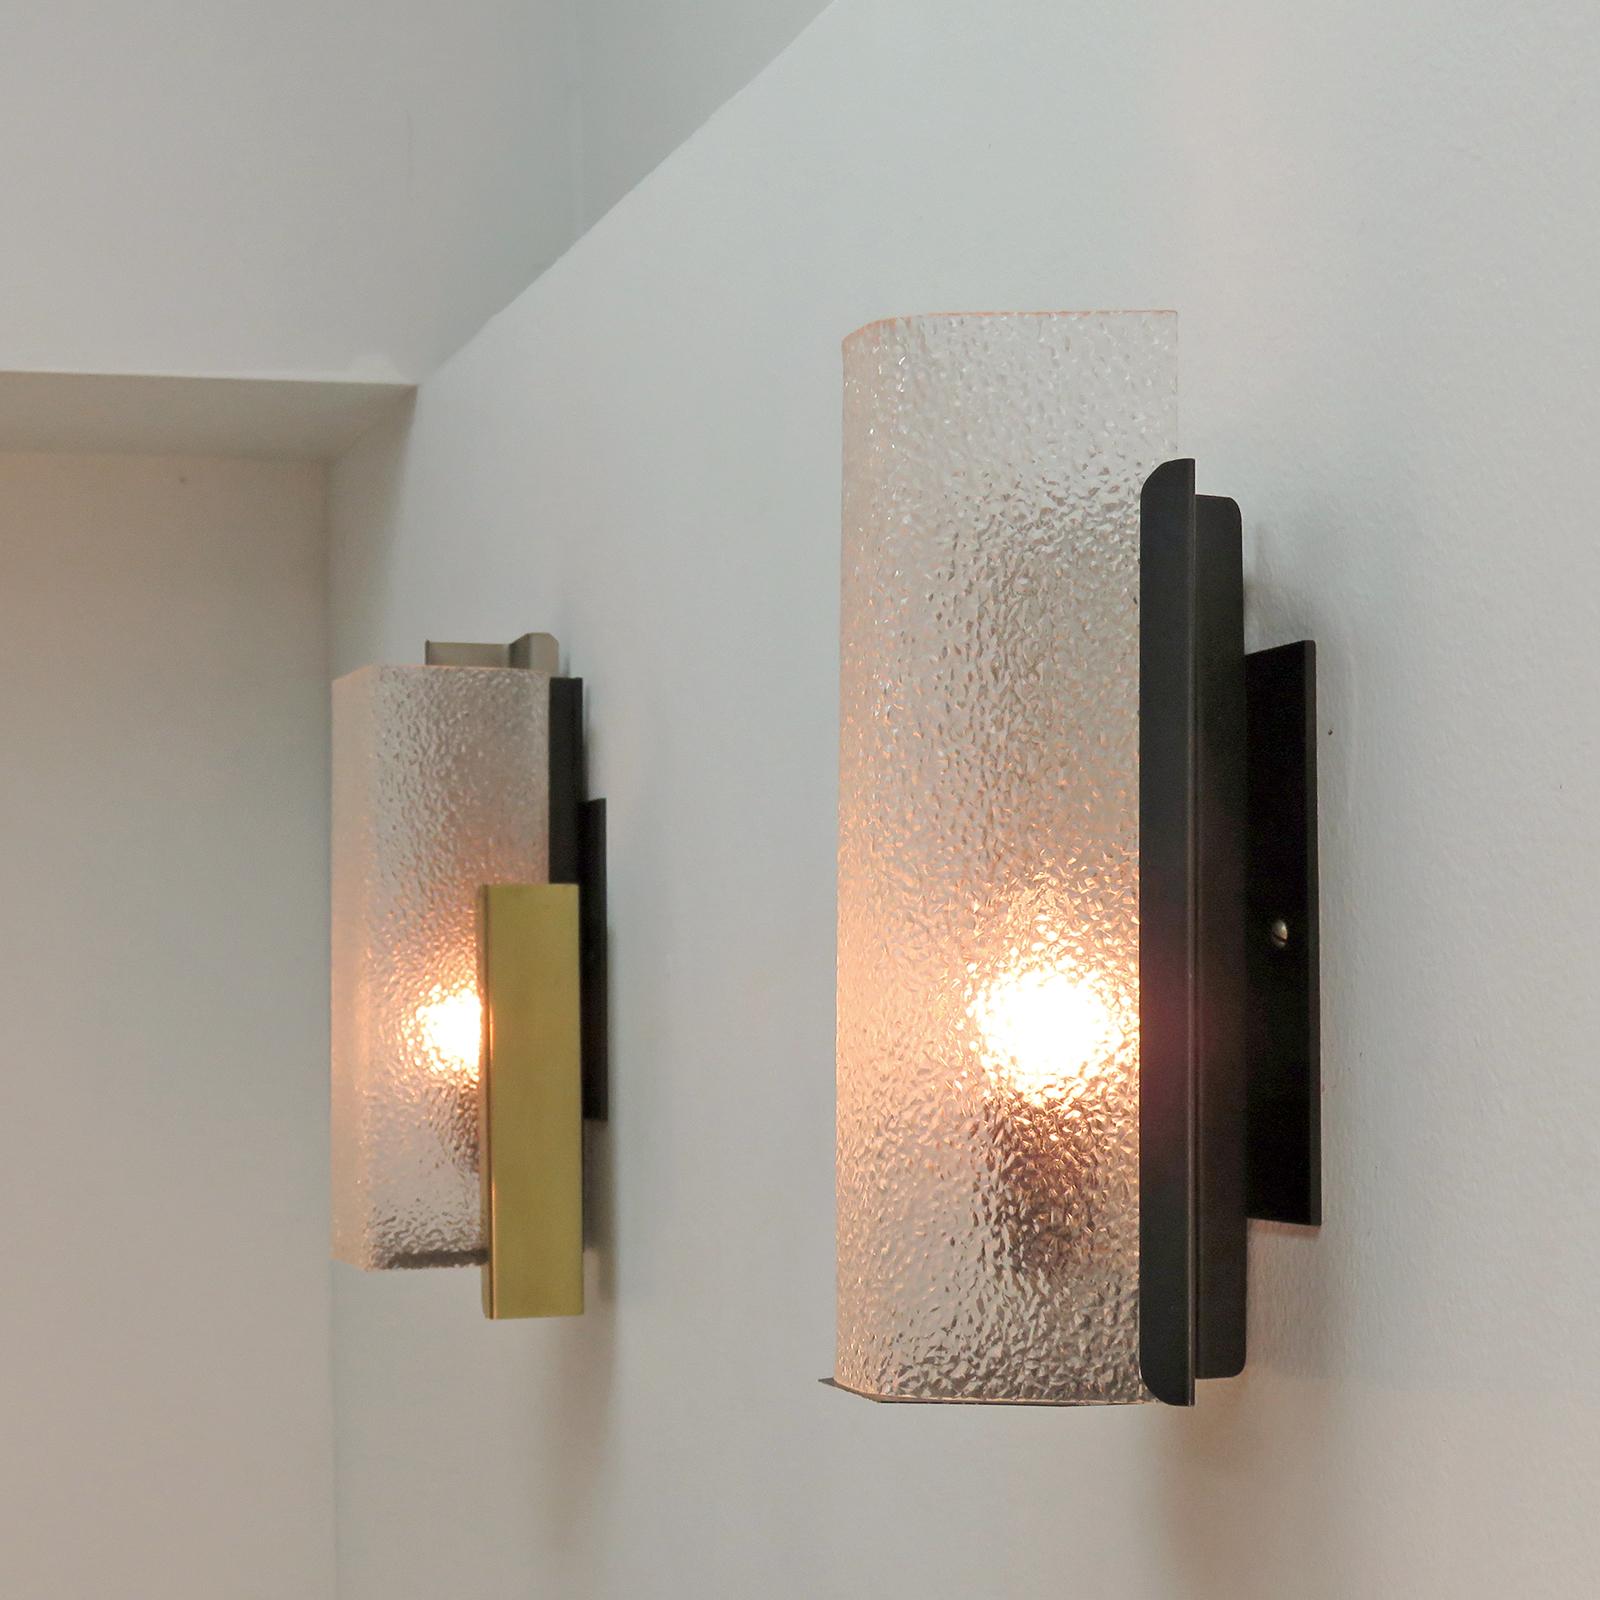 Mid-20th Century Geometric Wall Sconce by Arlus